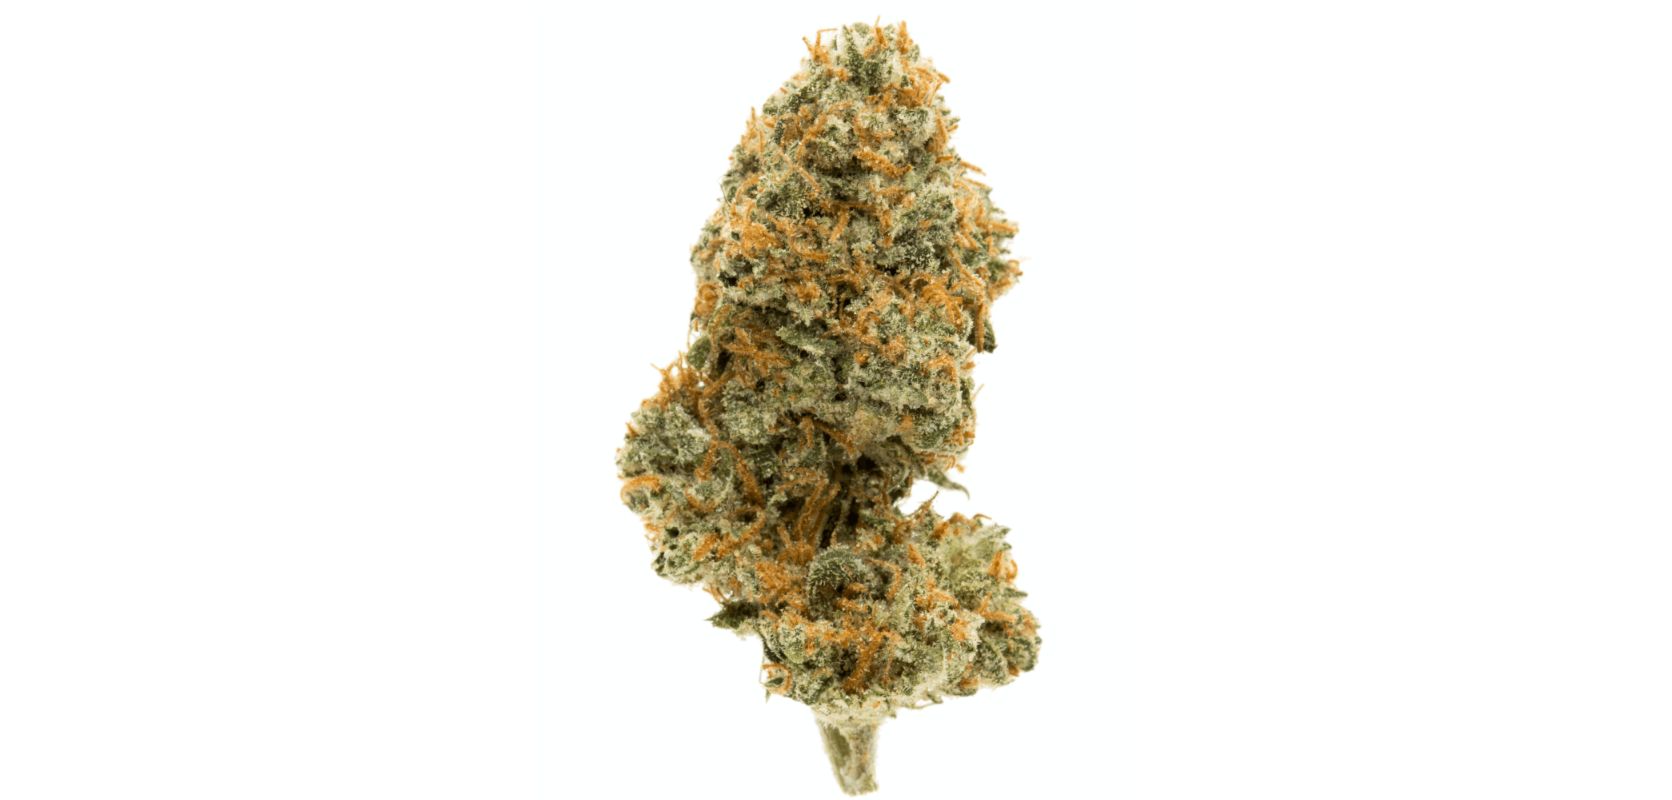 Ghost Train Haze, known as the "Most Potent Strain on Earth," is a bud that will leave you in awe of its power and long-lasting effects. 